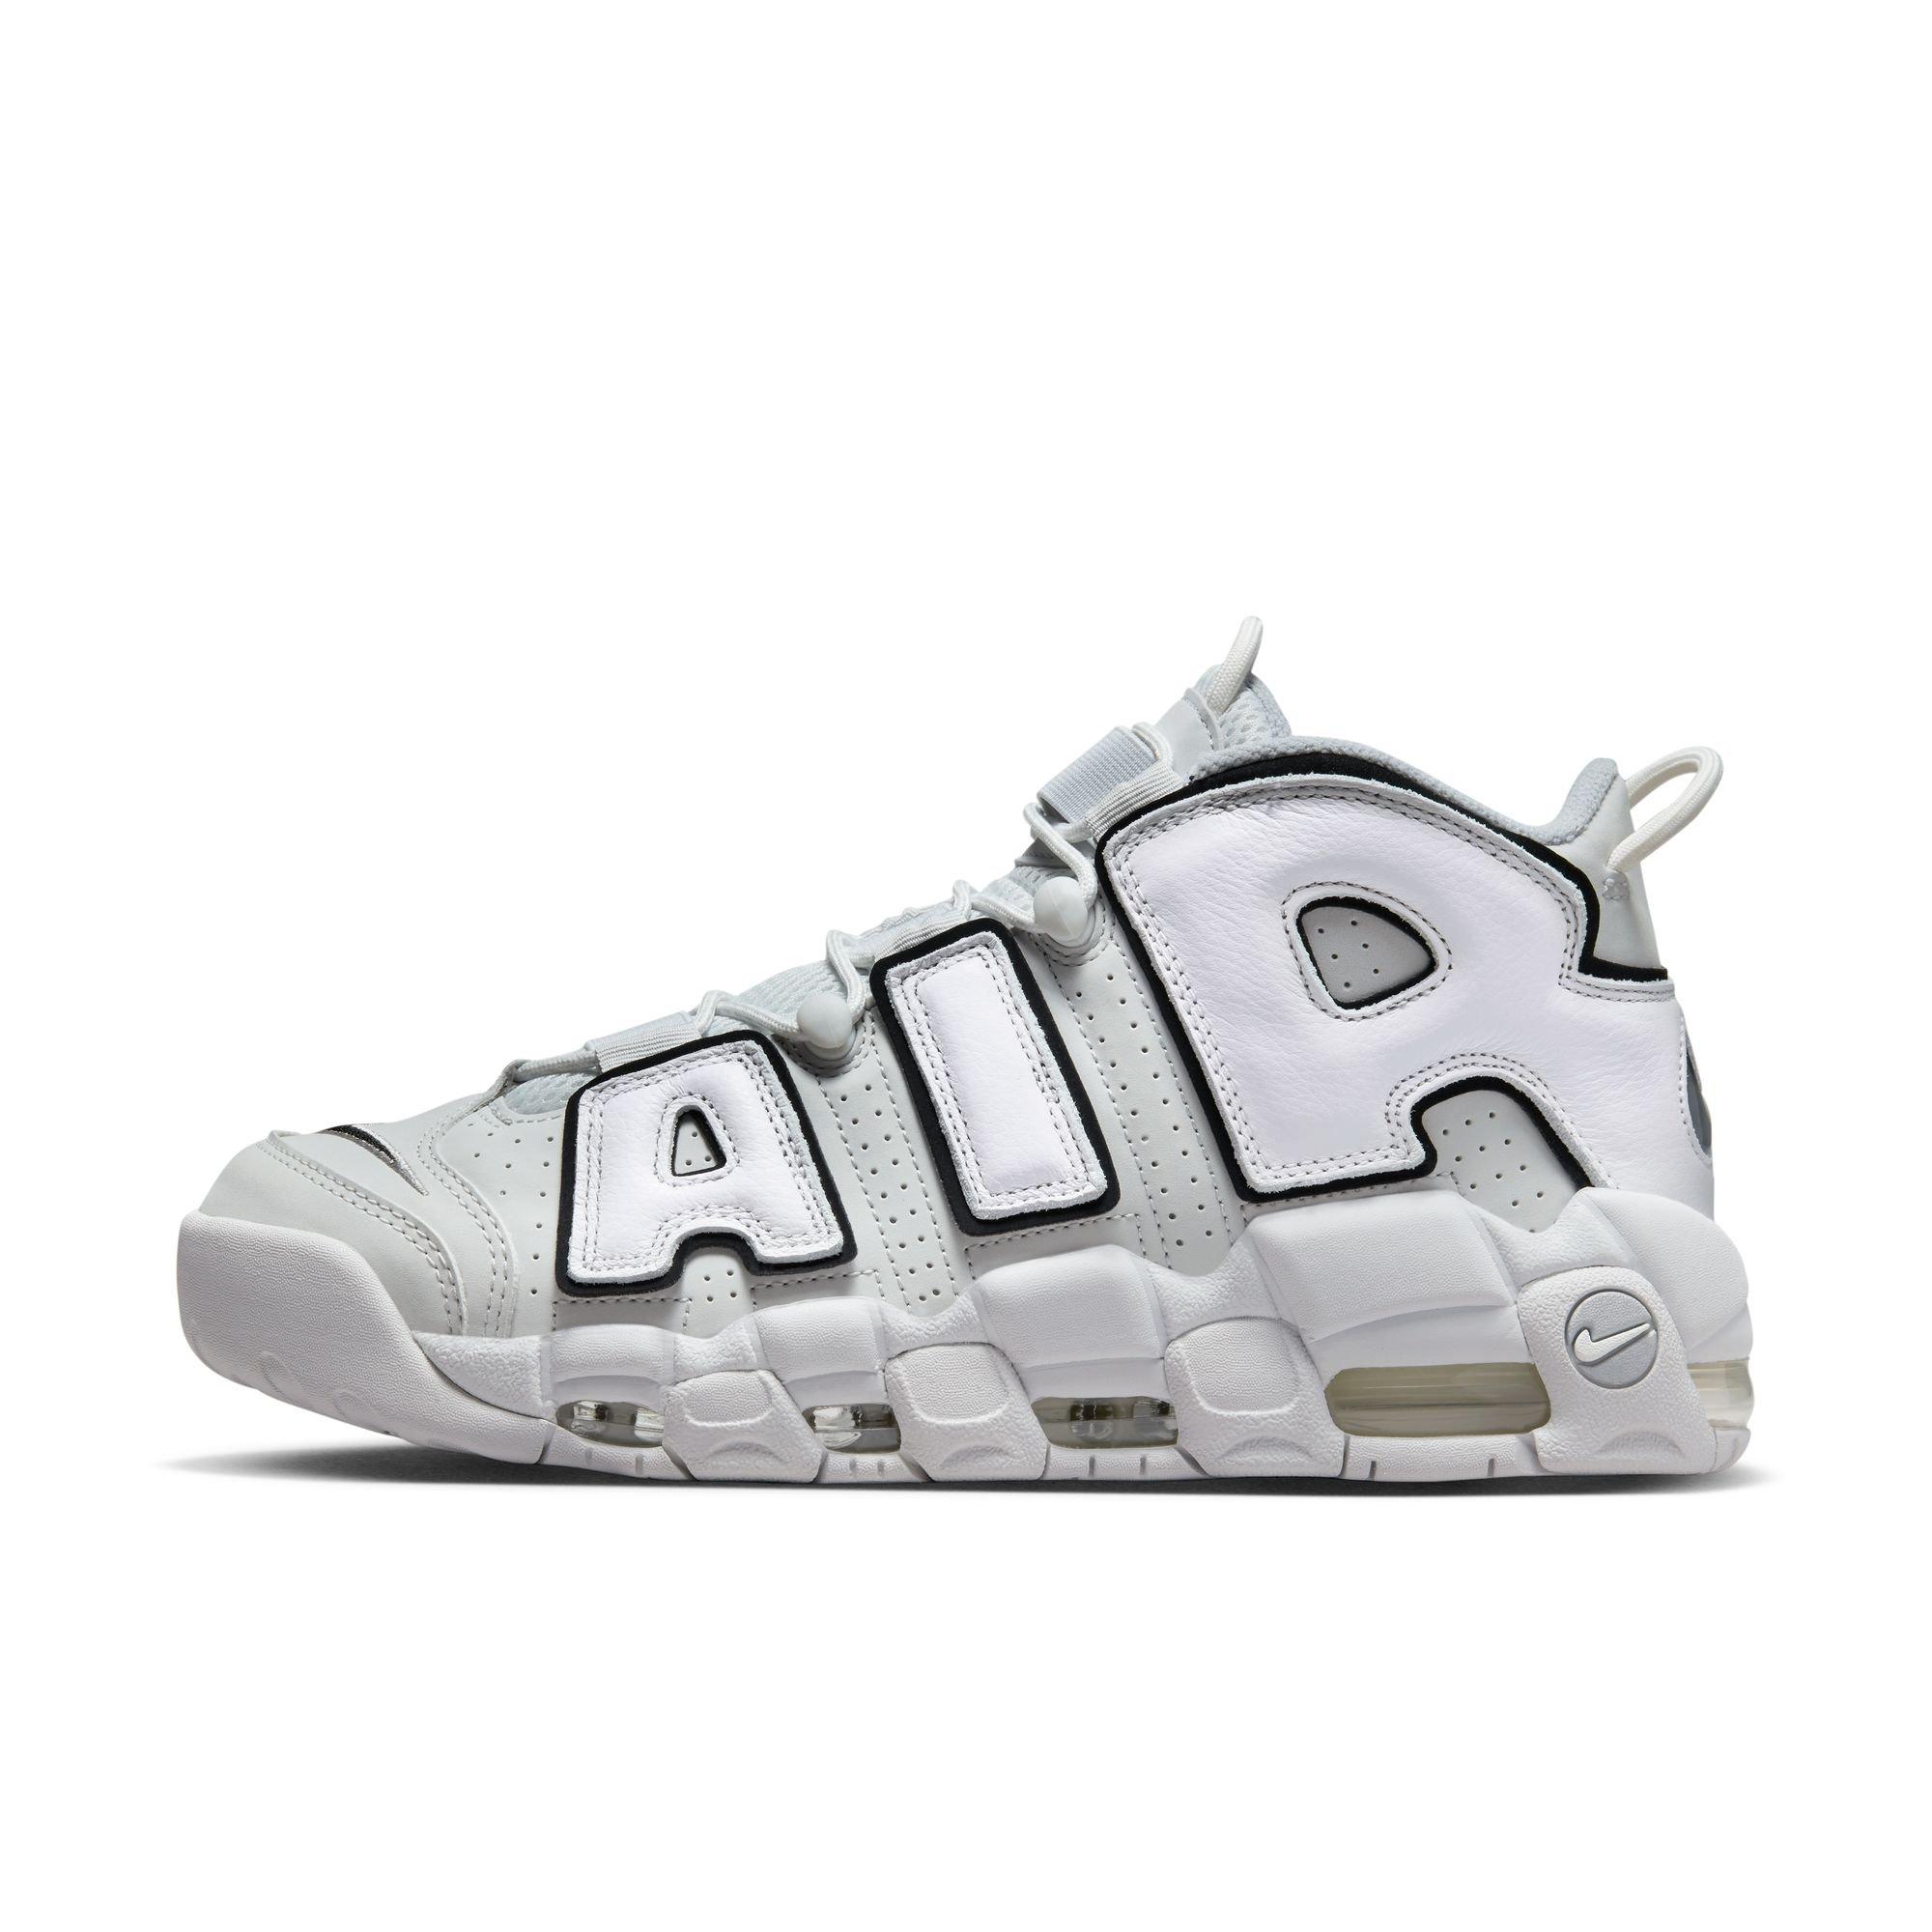 Nike x Supreme Air More Uptempo Review  Supreme shoes, Sneakers, Sneakers  men